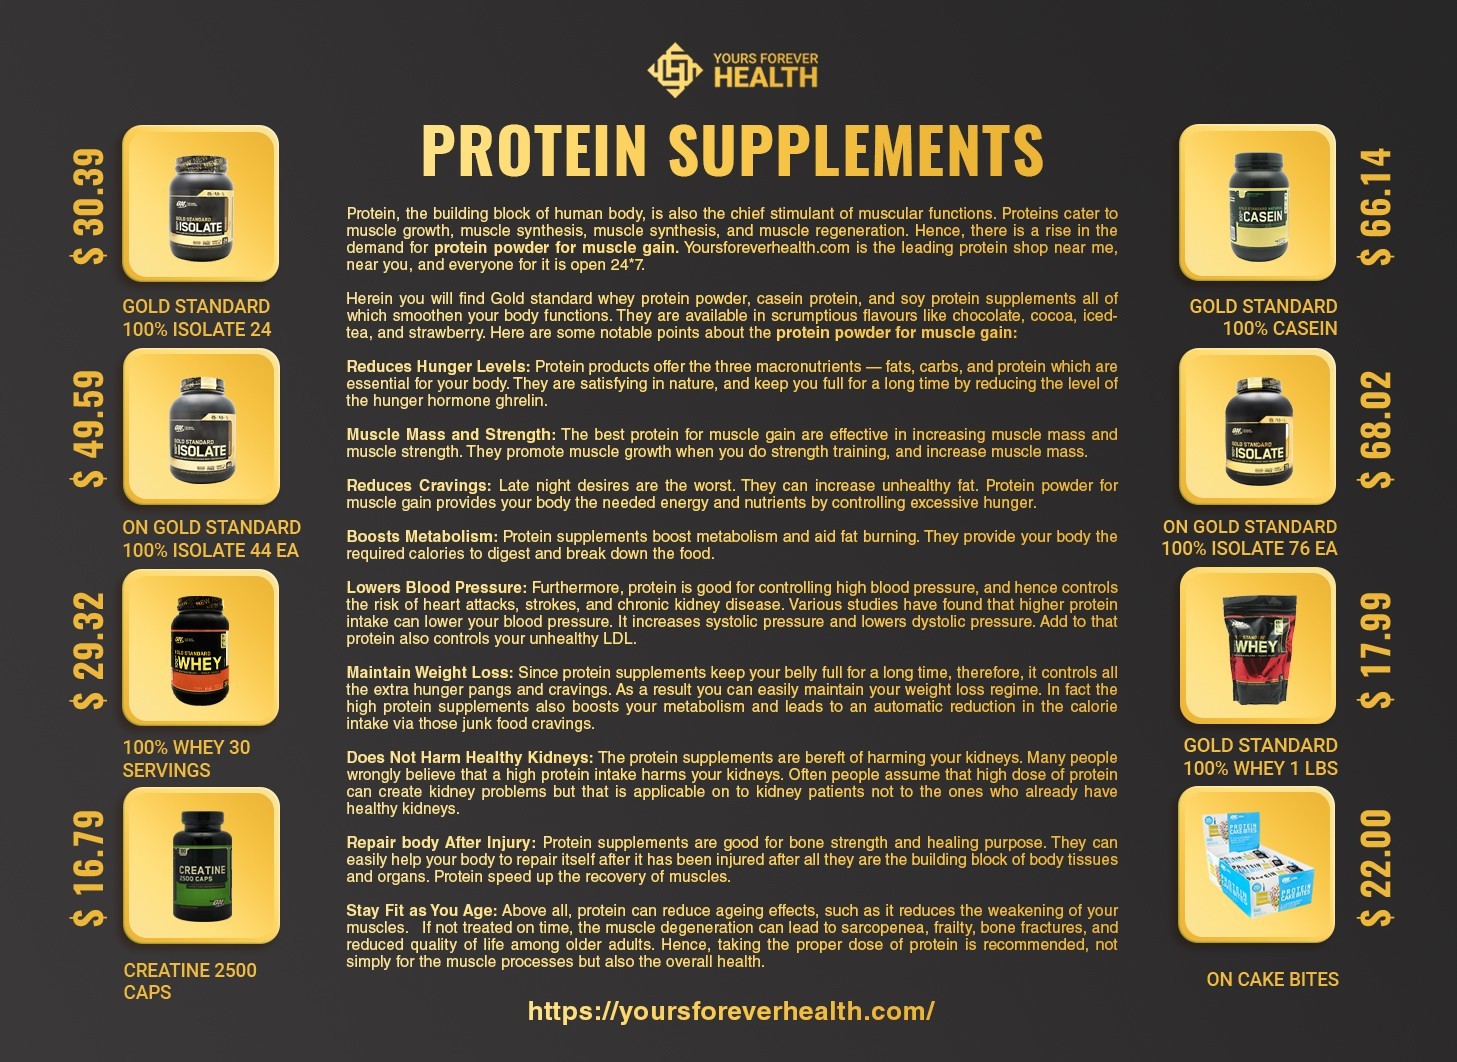 Shop For protein Supplements Now